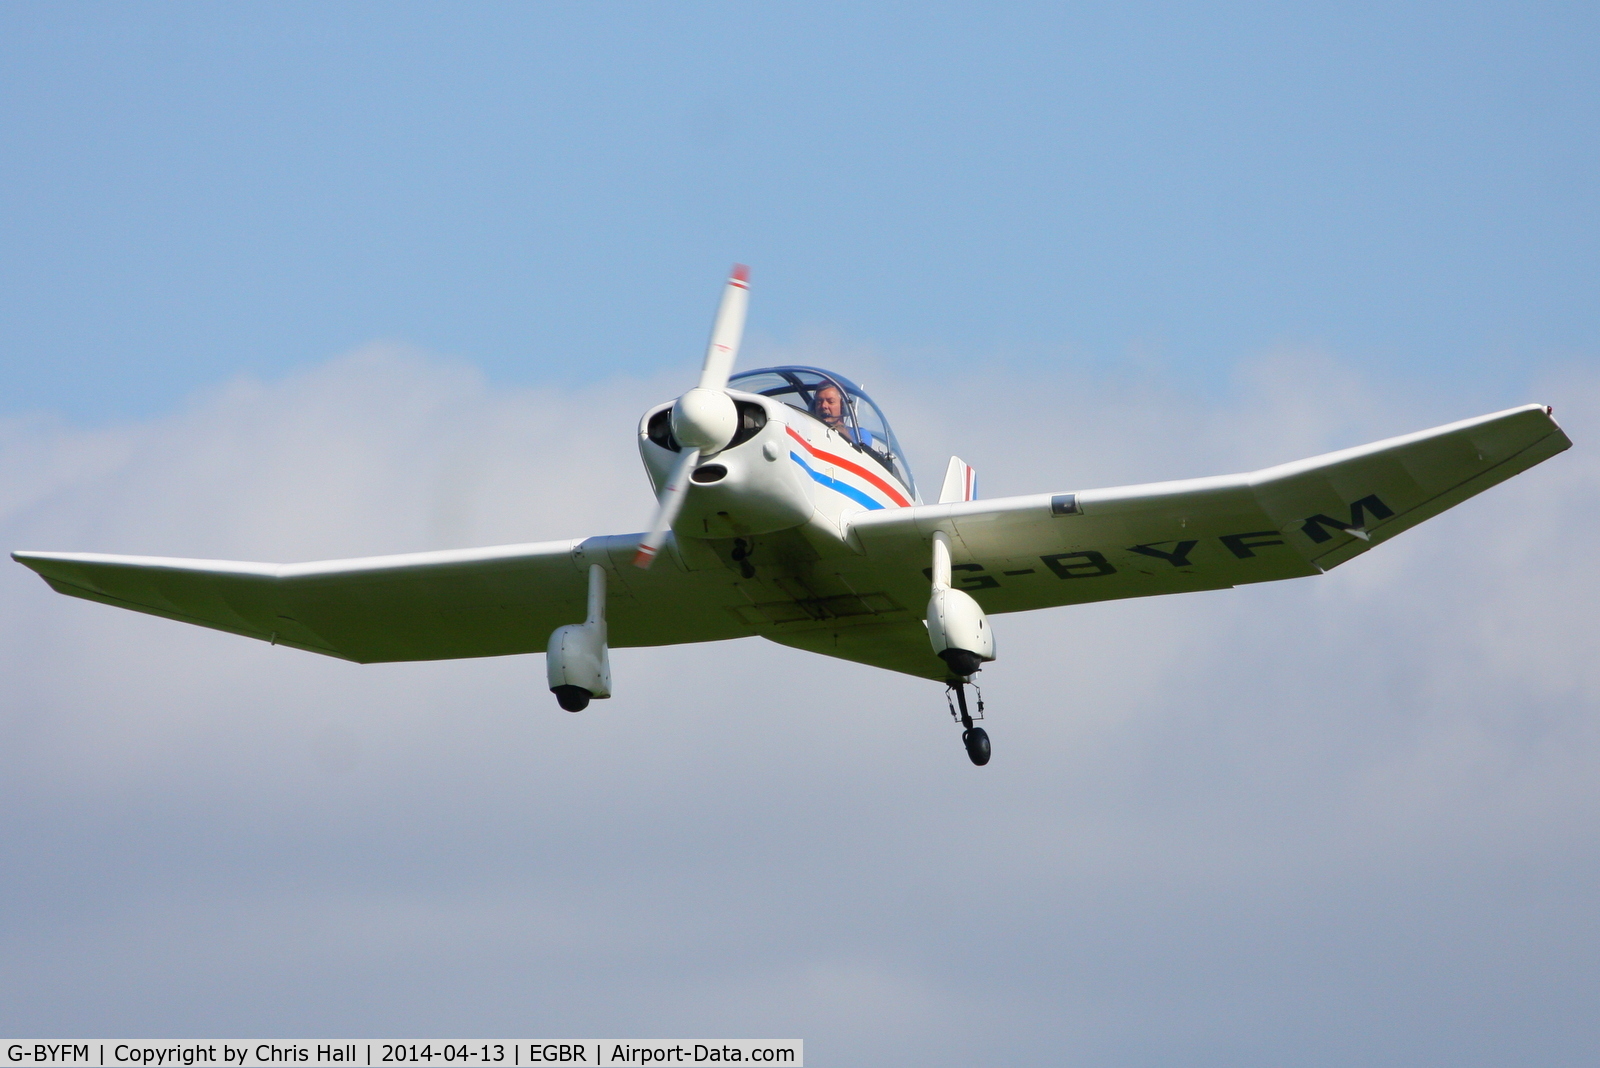 G-BYFM, 2000 Jodel DR-1050 M1 Excellence Replica C/N PFA 304-13237, at Breighton's 'Early Bird' Fly-in 13/04/14